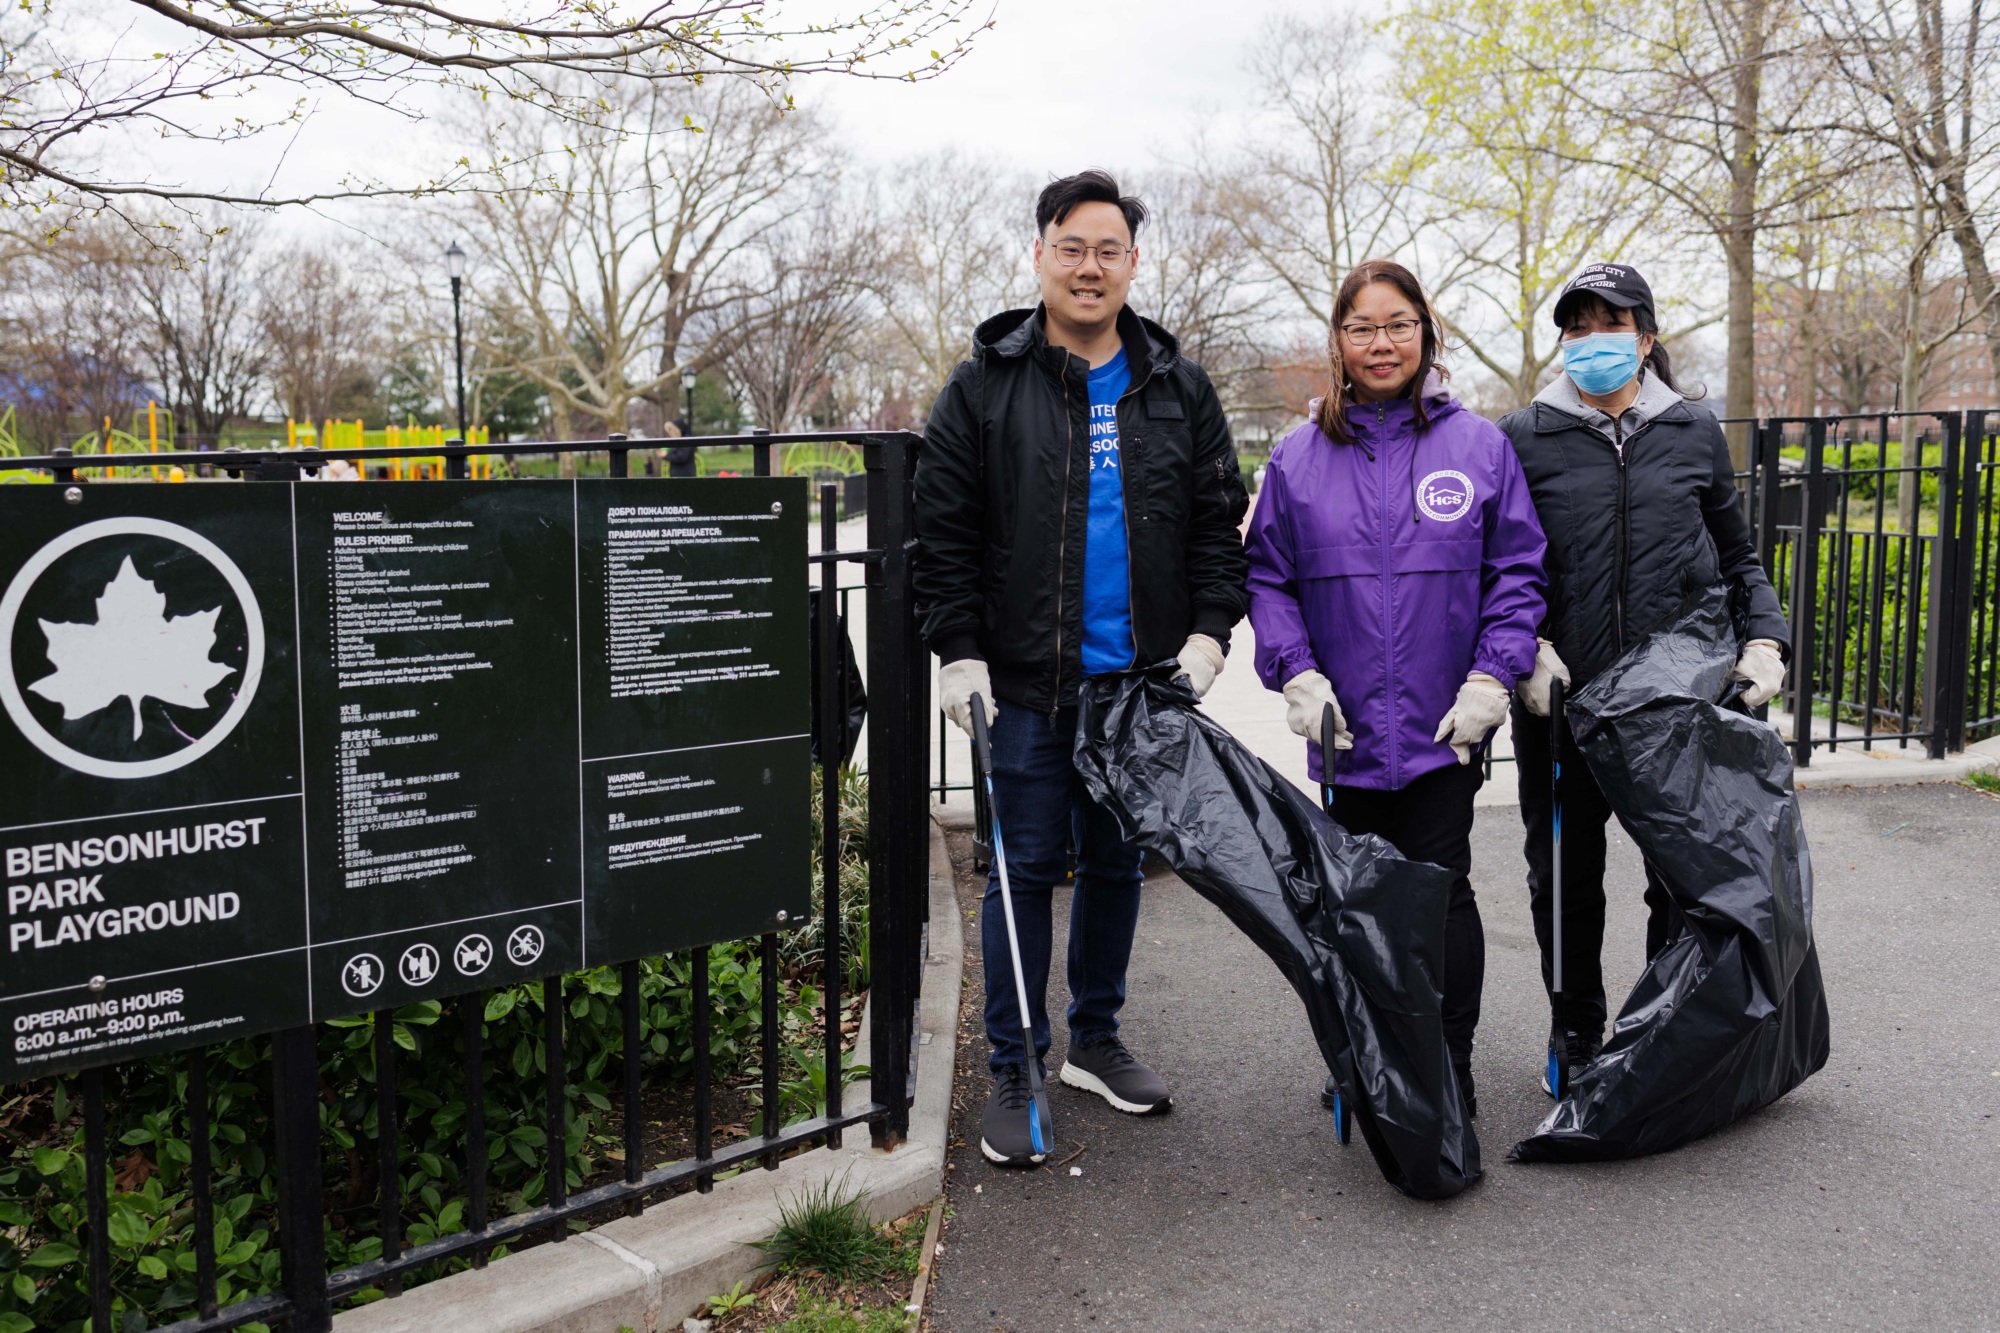 Three volunteers holding garbage bags in a park cleanup event, standing beside a sign for bensonhurst park playground.